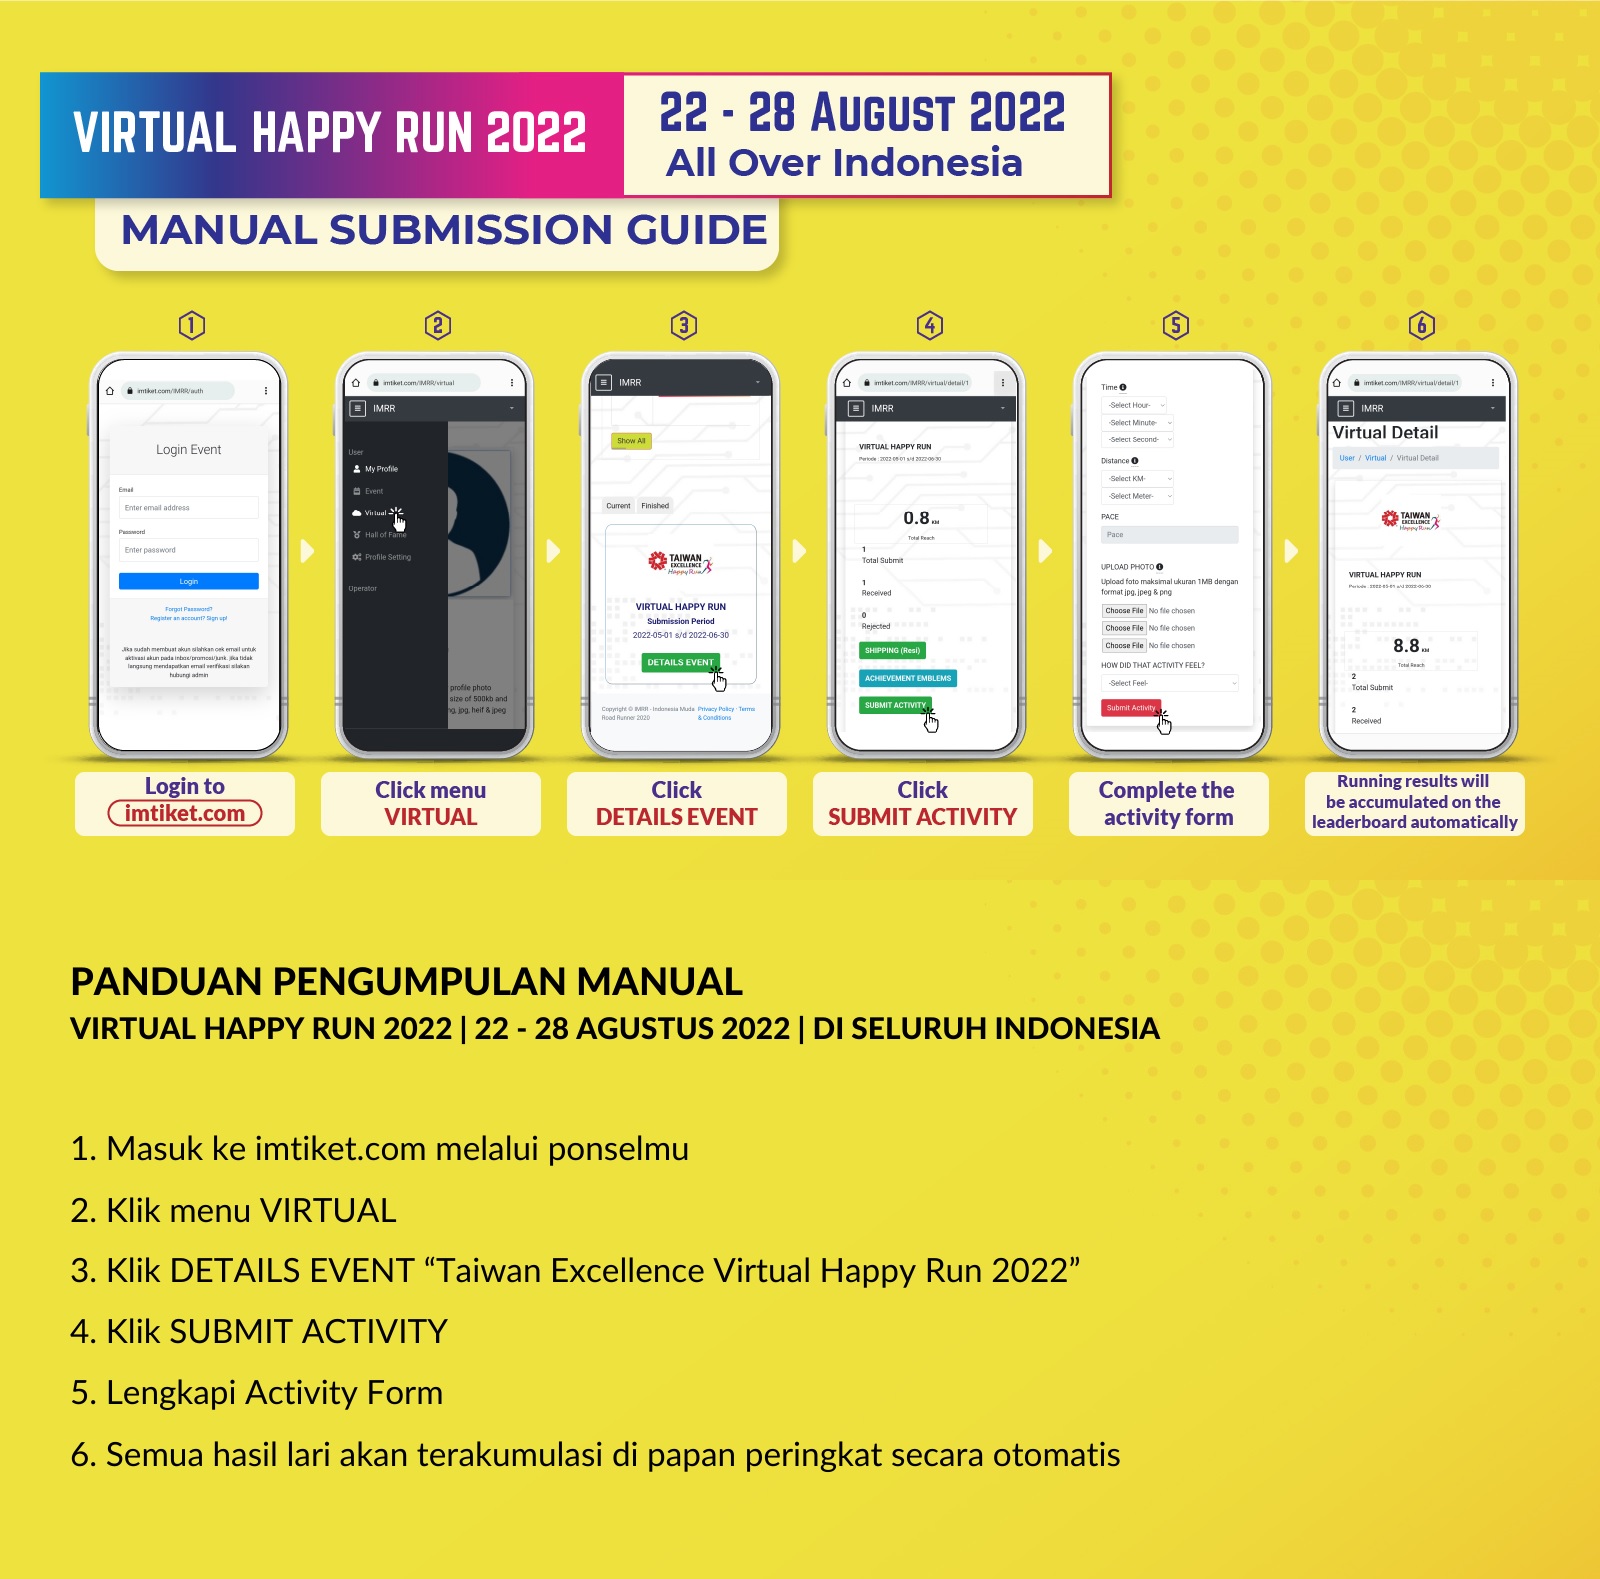 How To Join Virtual Happy1 Run